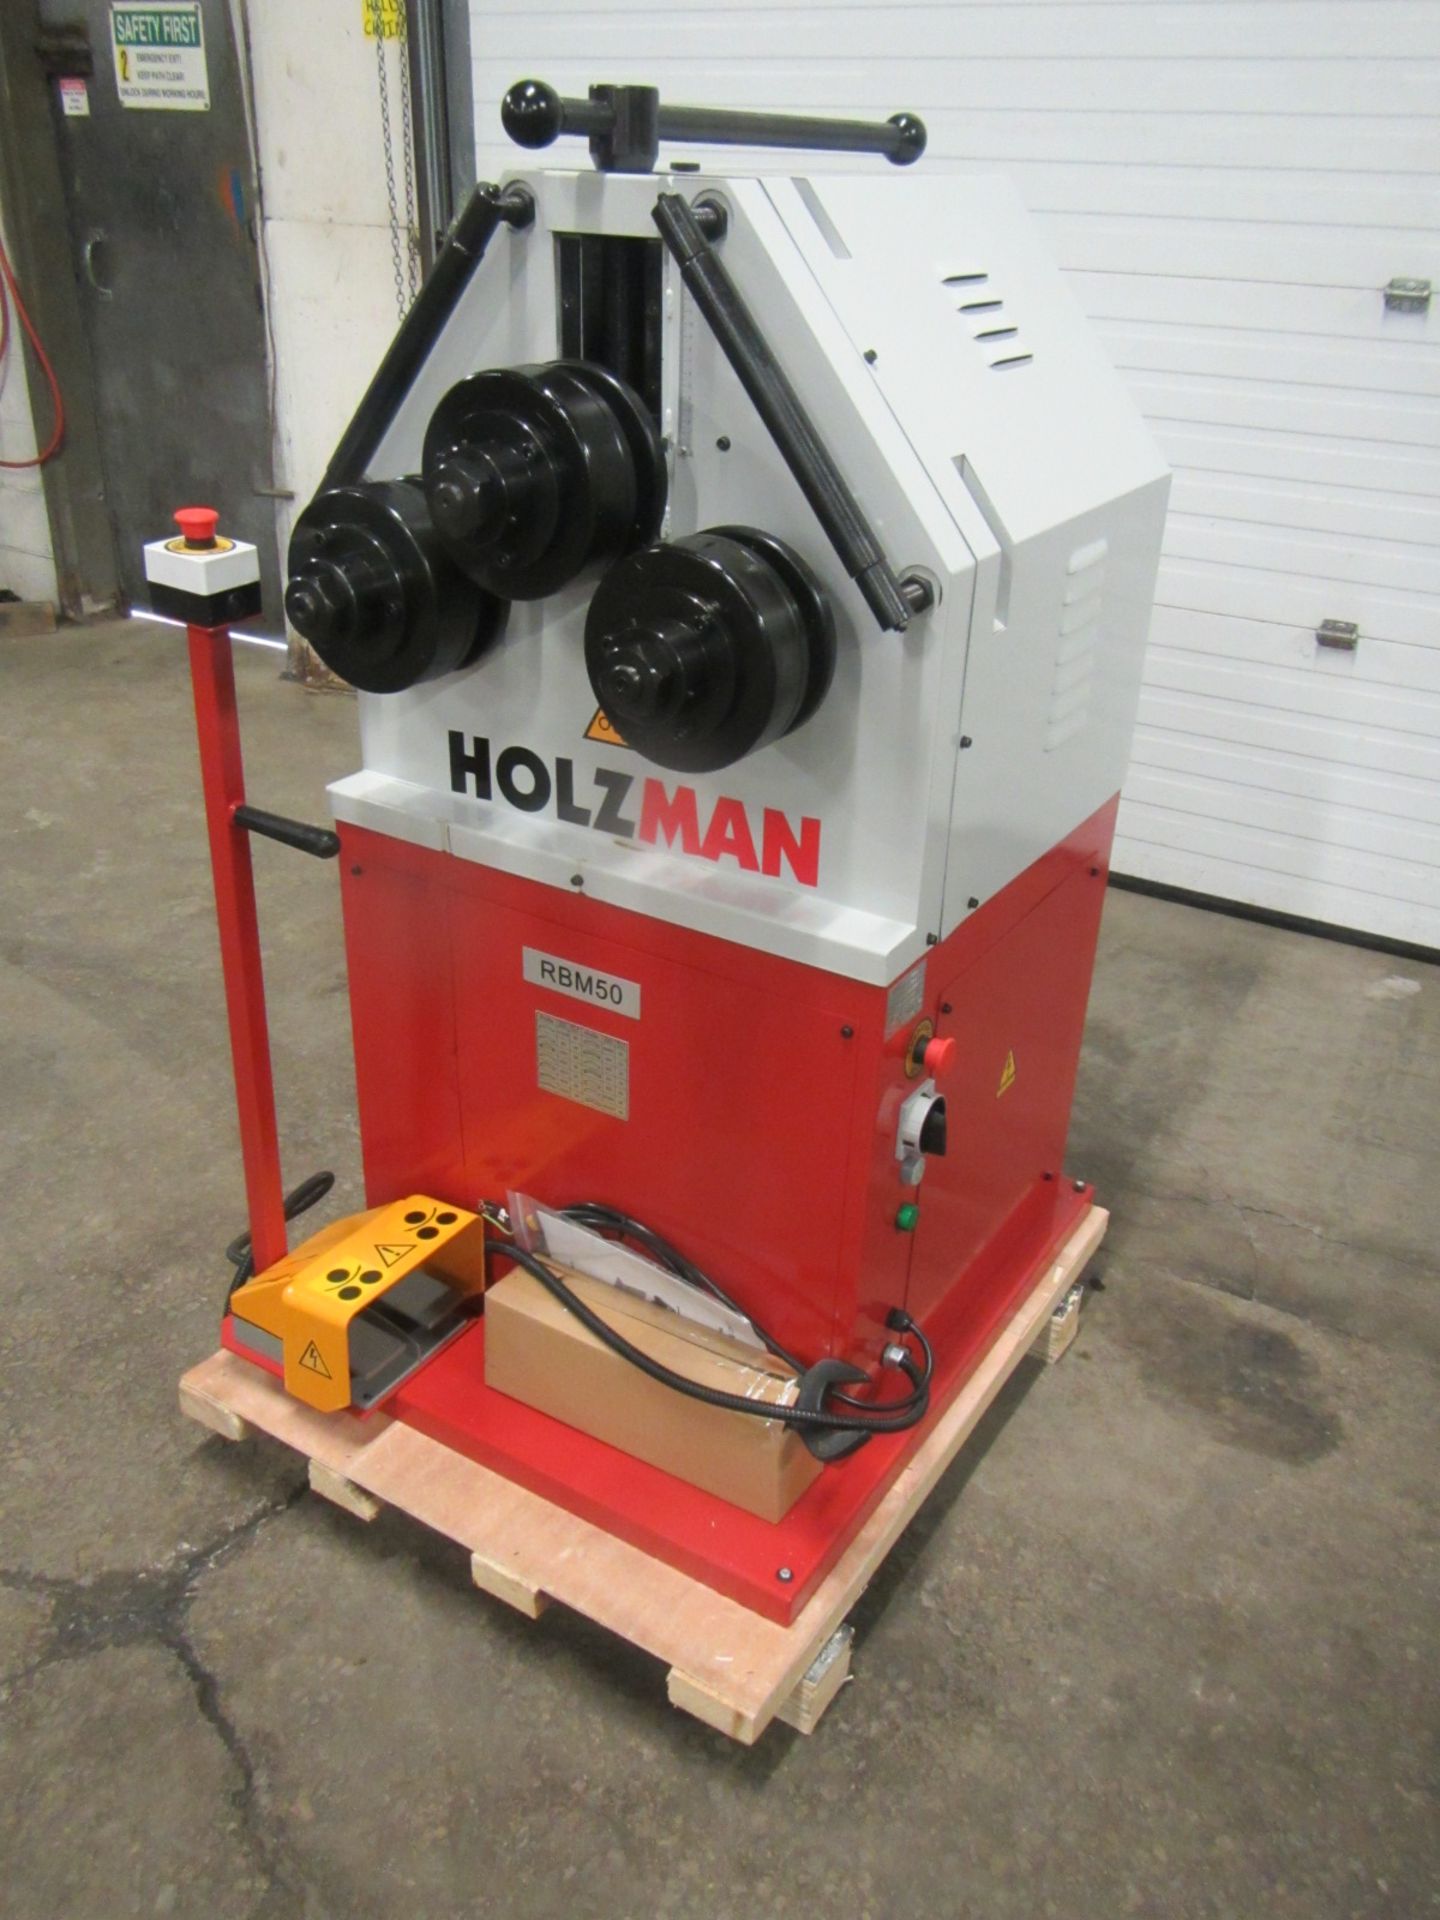 Holzman Pyramid Angle Rolls - Tube Bender - 220V 3 phase with foot pedal control - MINT / UNUSED